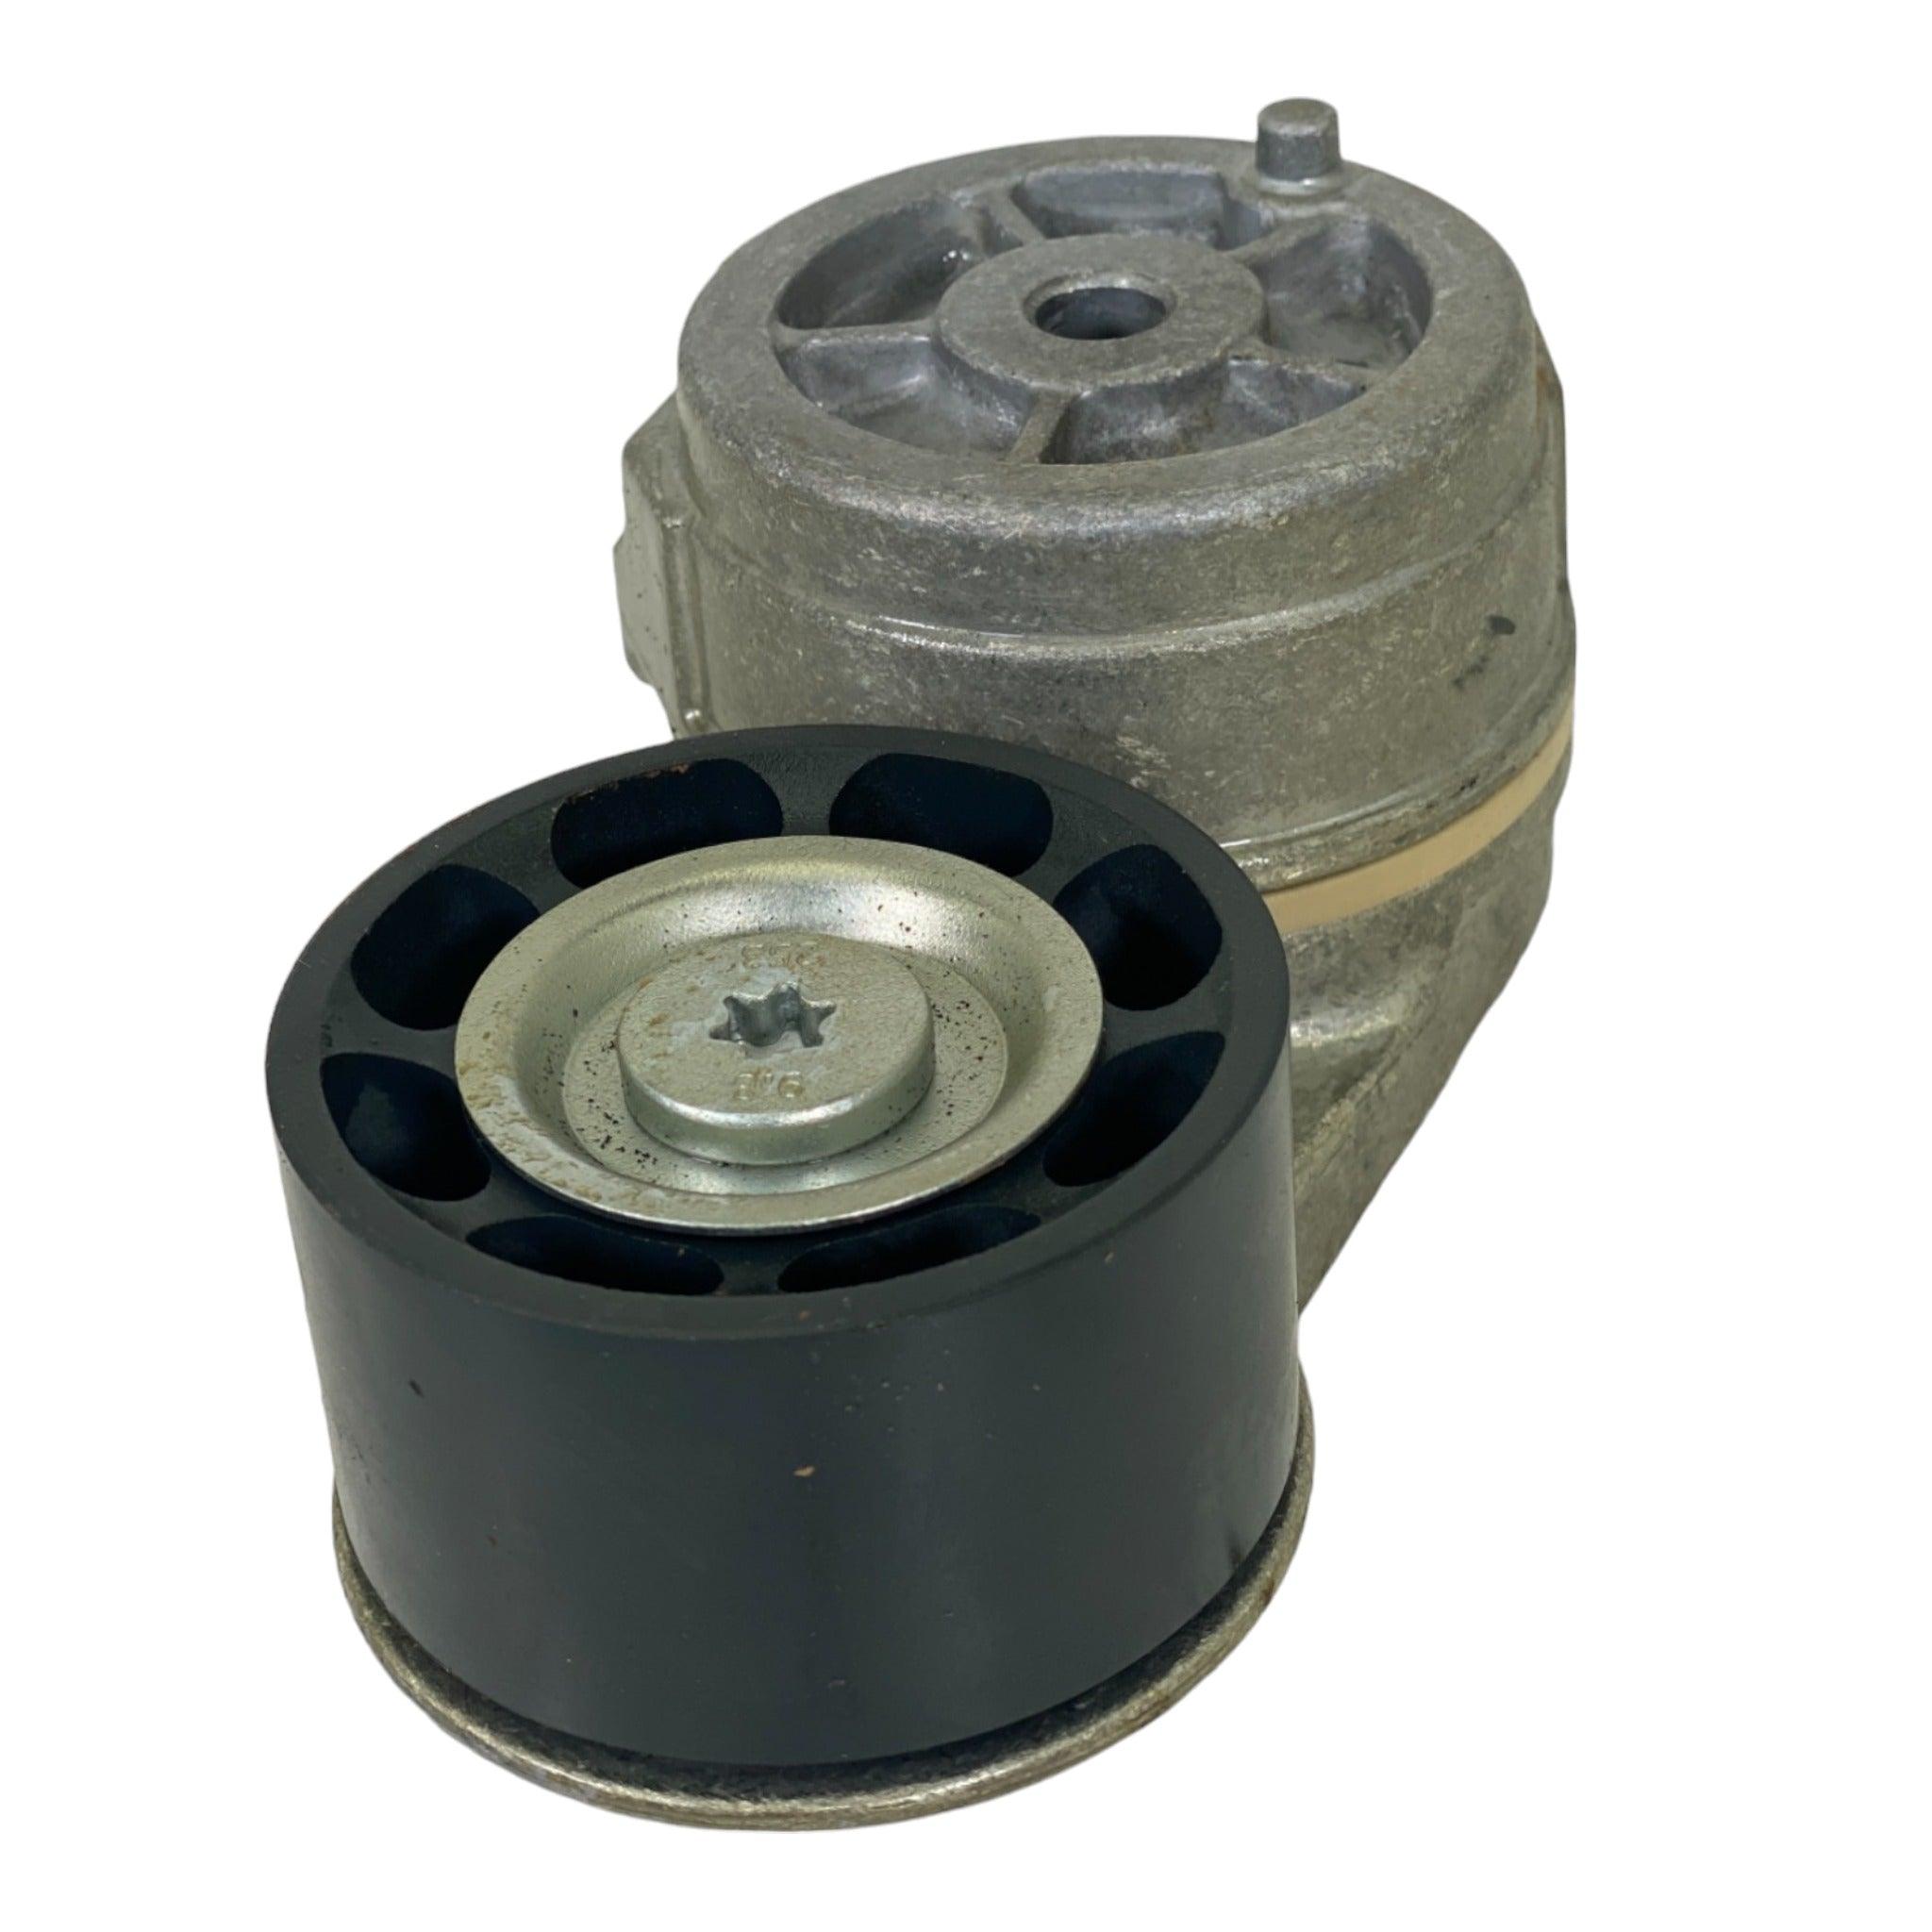 5342504 Genuine Cummins Belt Tensioner For Construction Isf Qsf Engines - ADVANCED TRUCK PARTS